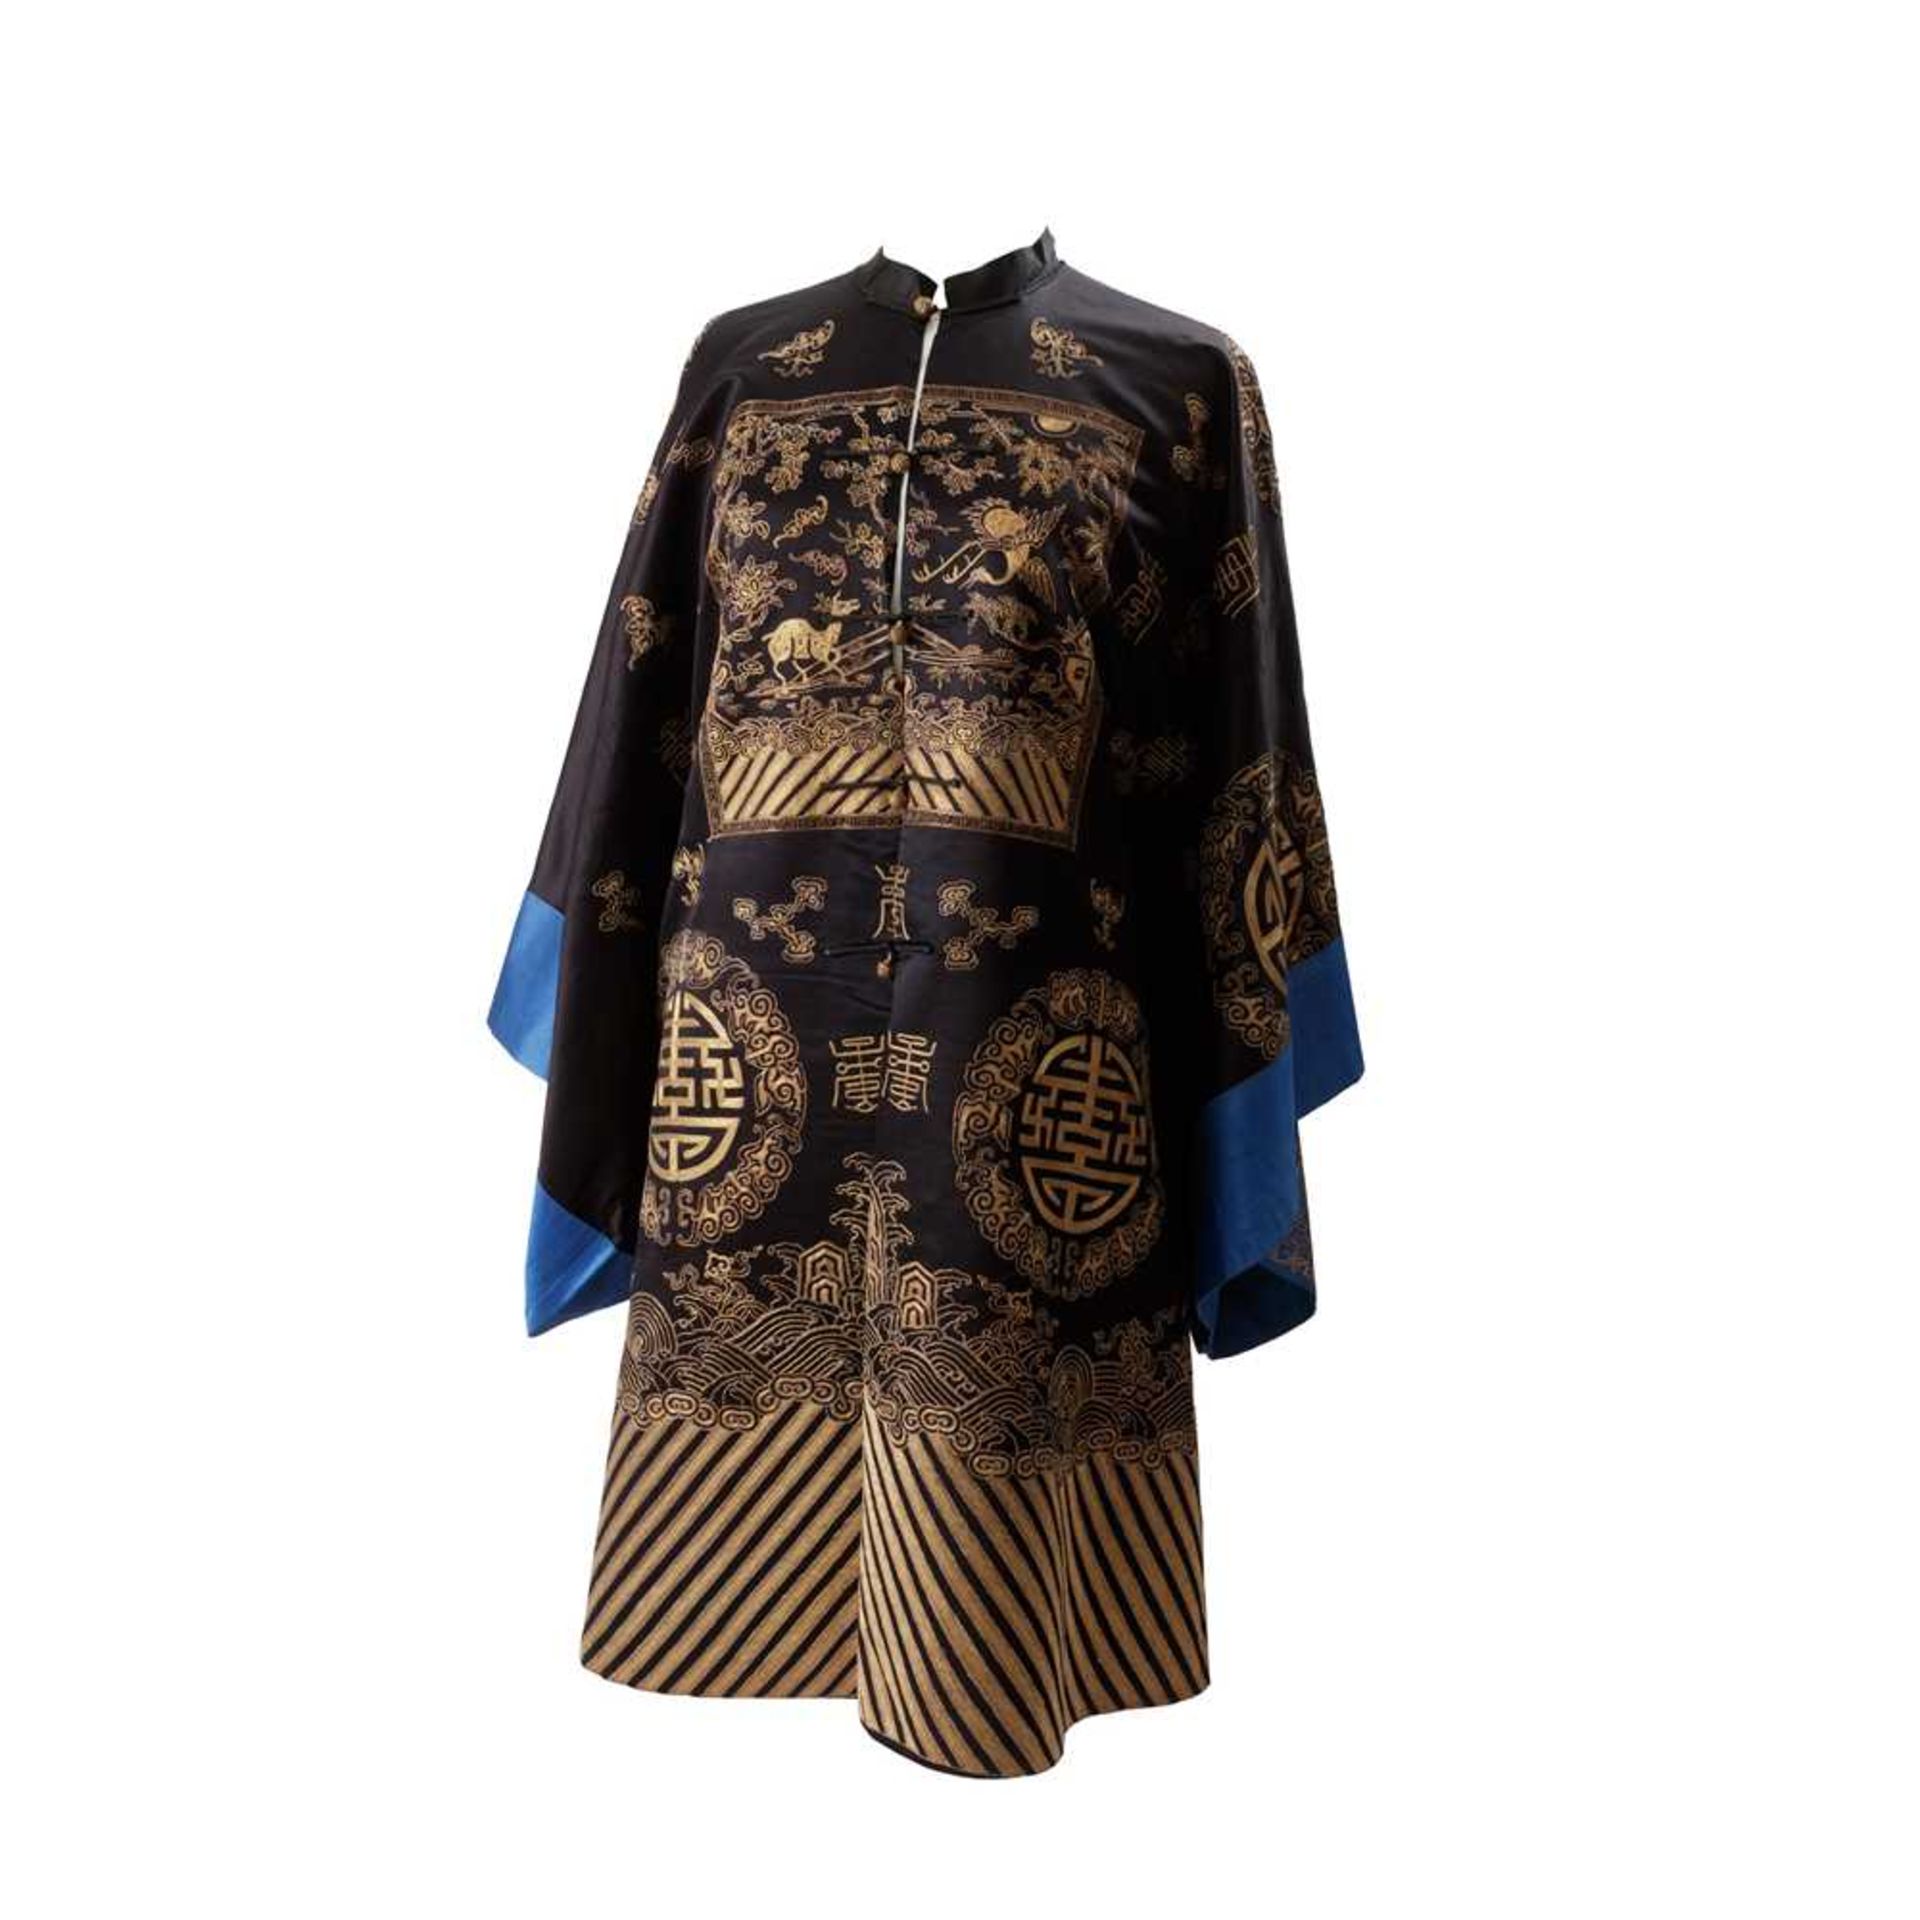 BLACK-GROUND SILK EMBROIDERED 'SHOU' OVERCOAT LATE QING DYNASTY-REPUBLIC PERIOD, 19TH-20TH CENTURY